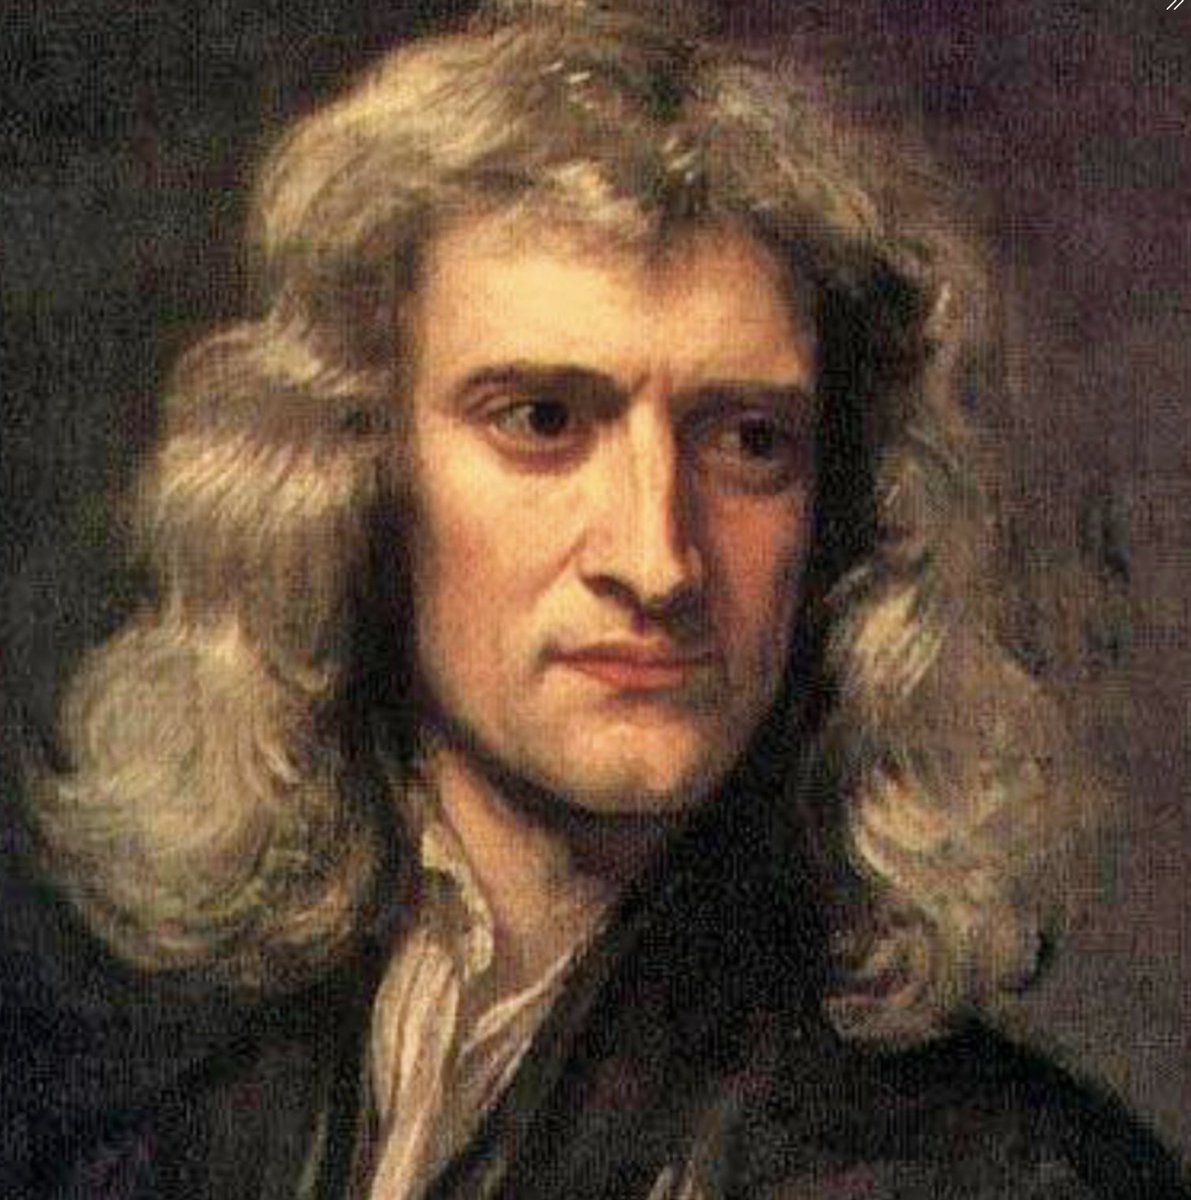 Money Twitter 1687Isaac Newton invents physics over the weekend. Posts mega-thread titled “Philosophiæ Naturalis Principia Mathematica”Money Twitter 2020 Bots and basic bros copy/paste platitudes in an elaborate attempt to sell Gumroad courses.Pathetic